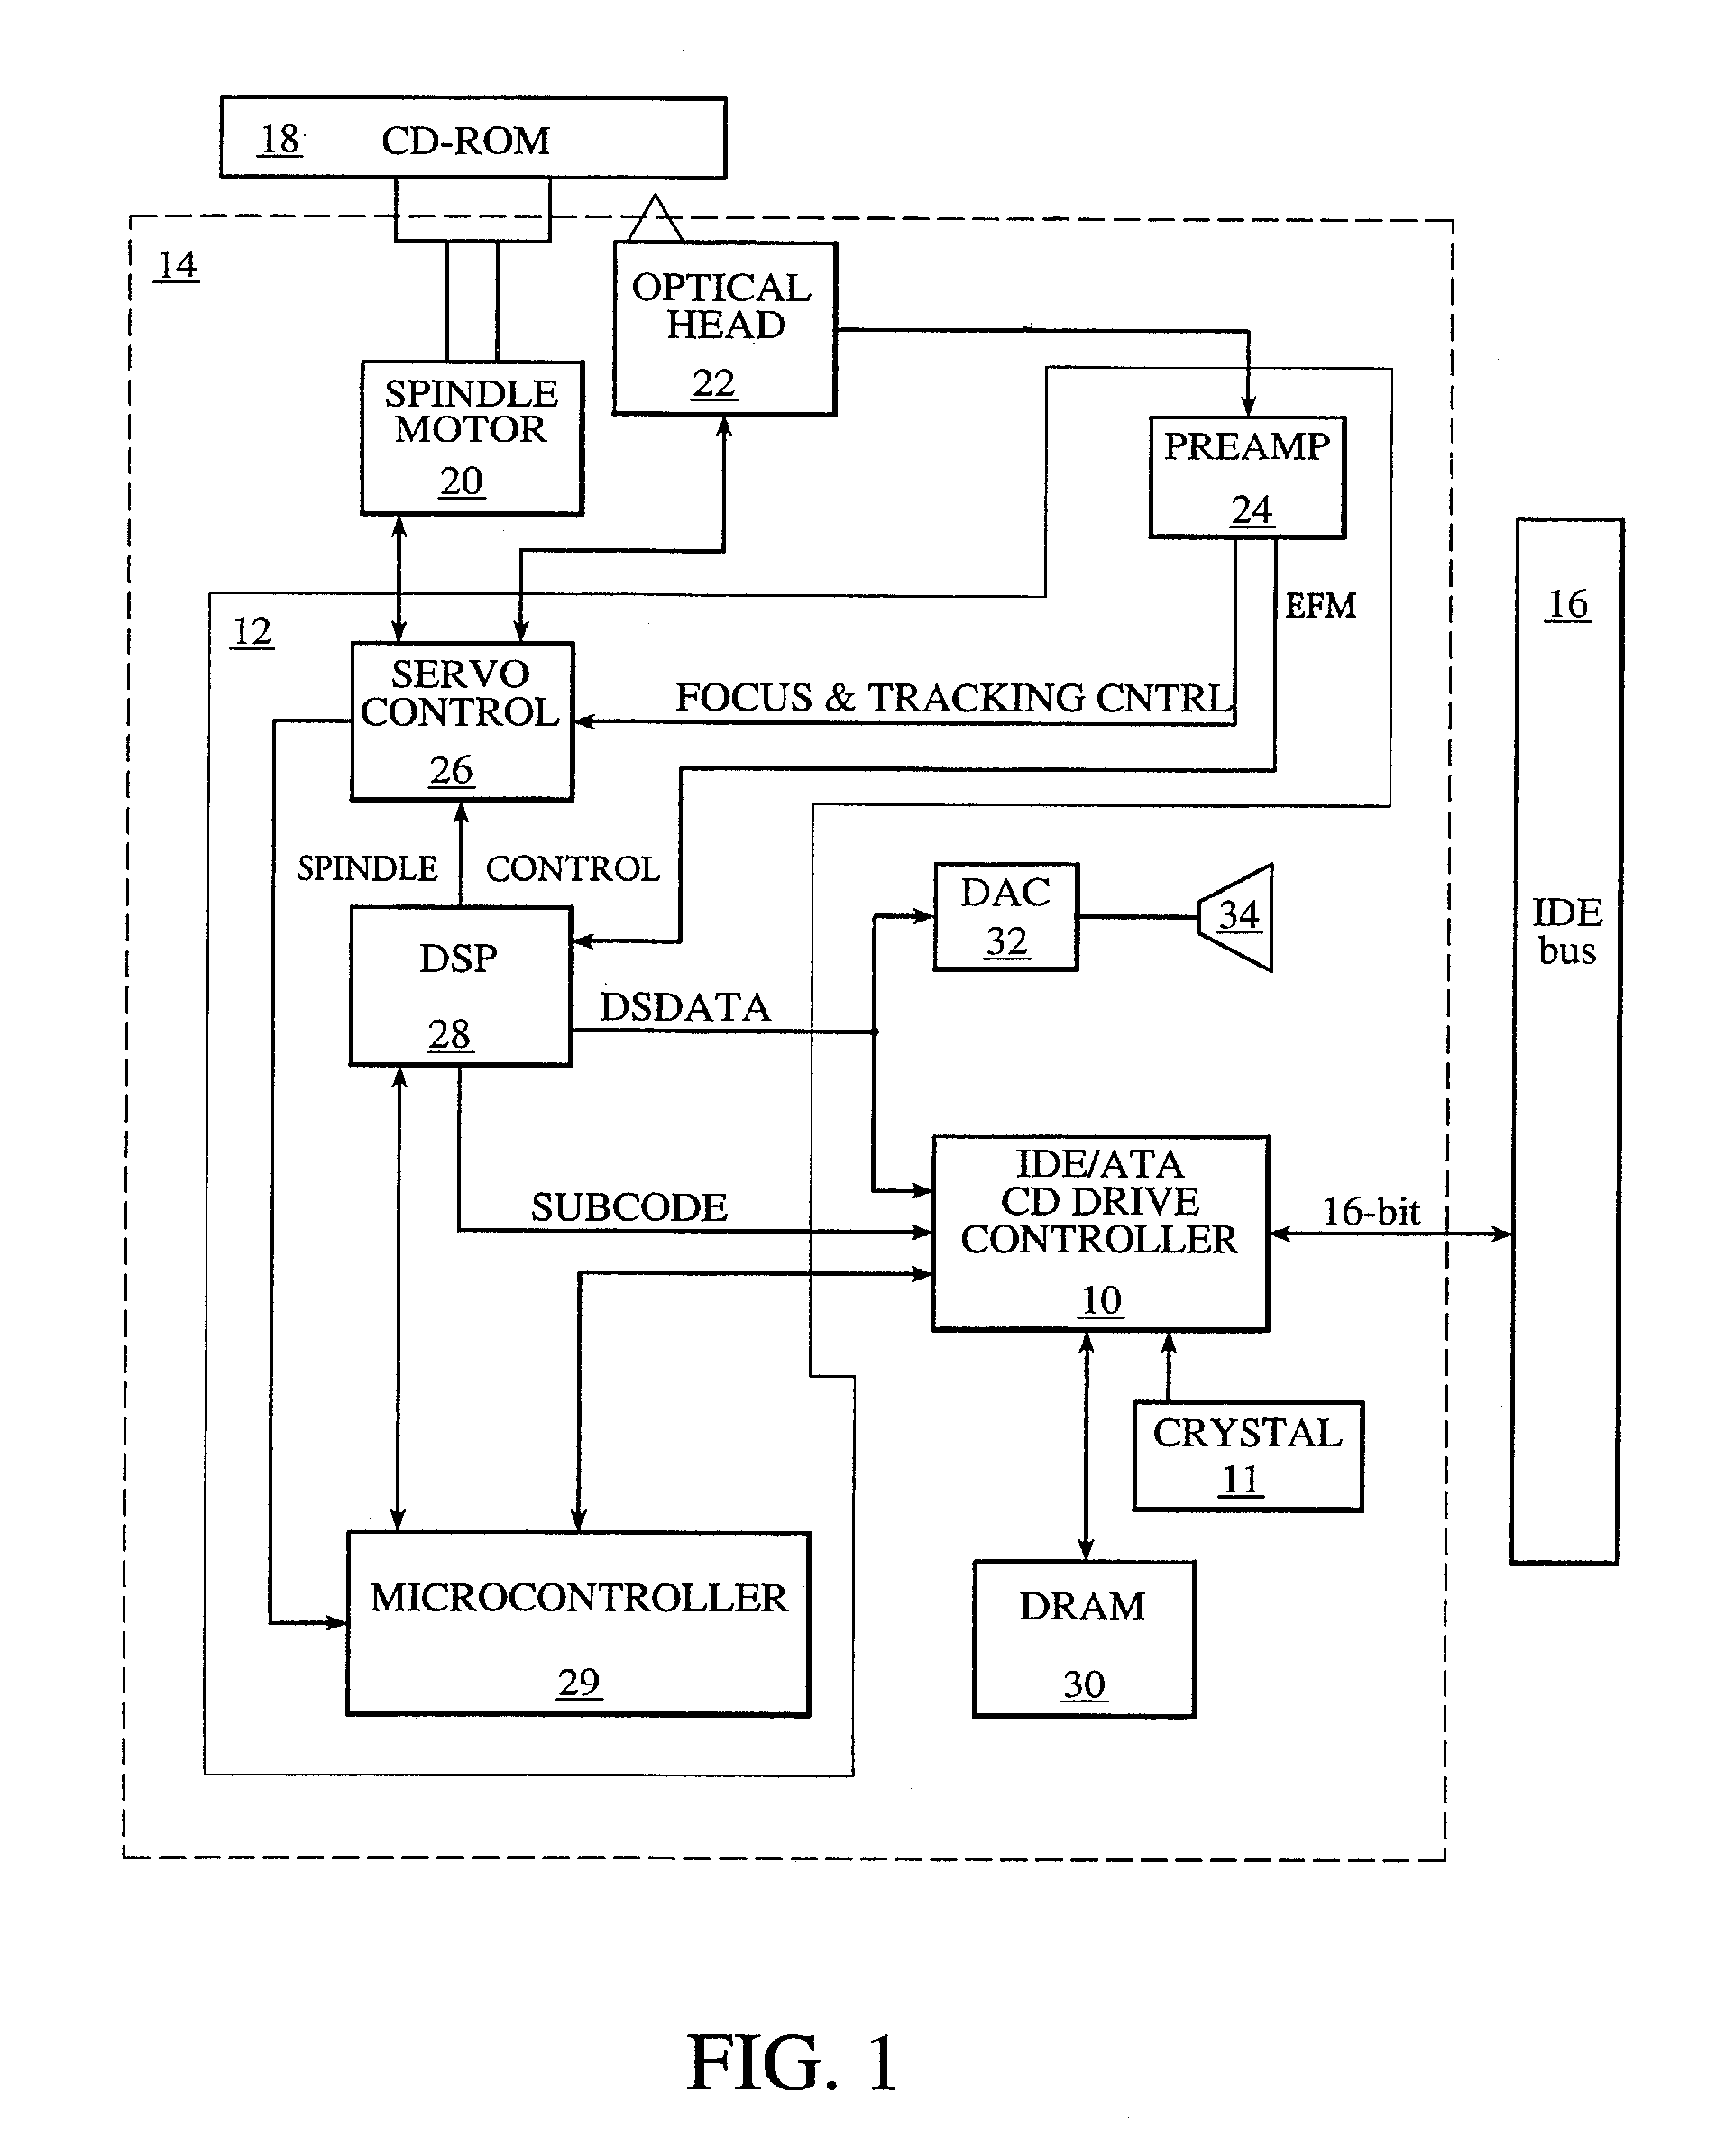 Optical drive controller with a host interface for direct connection to an ide/ata data bus